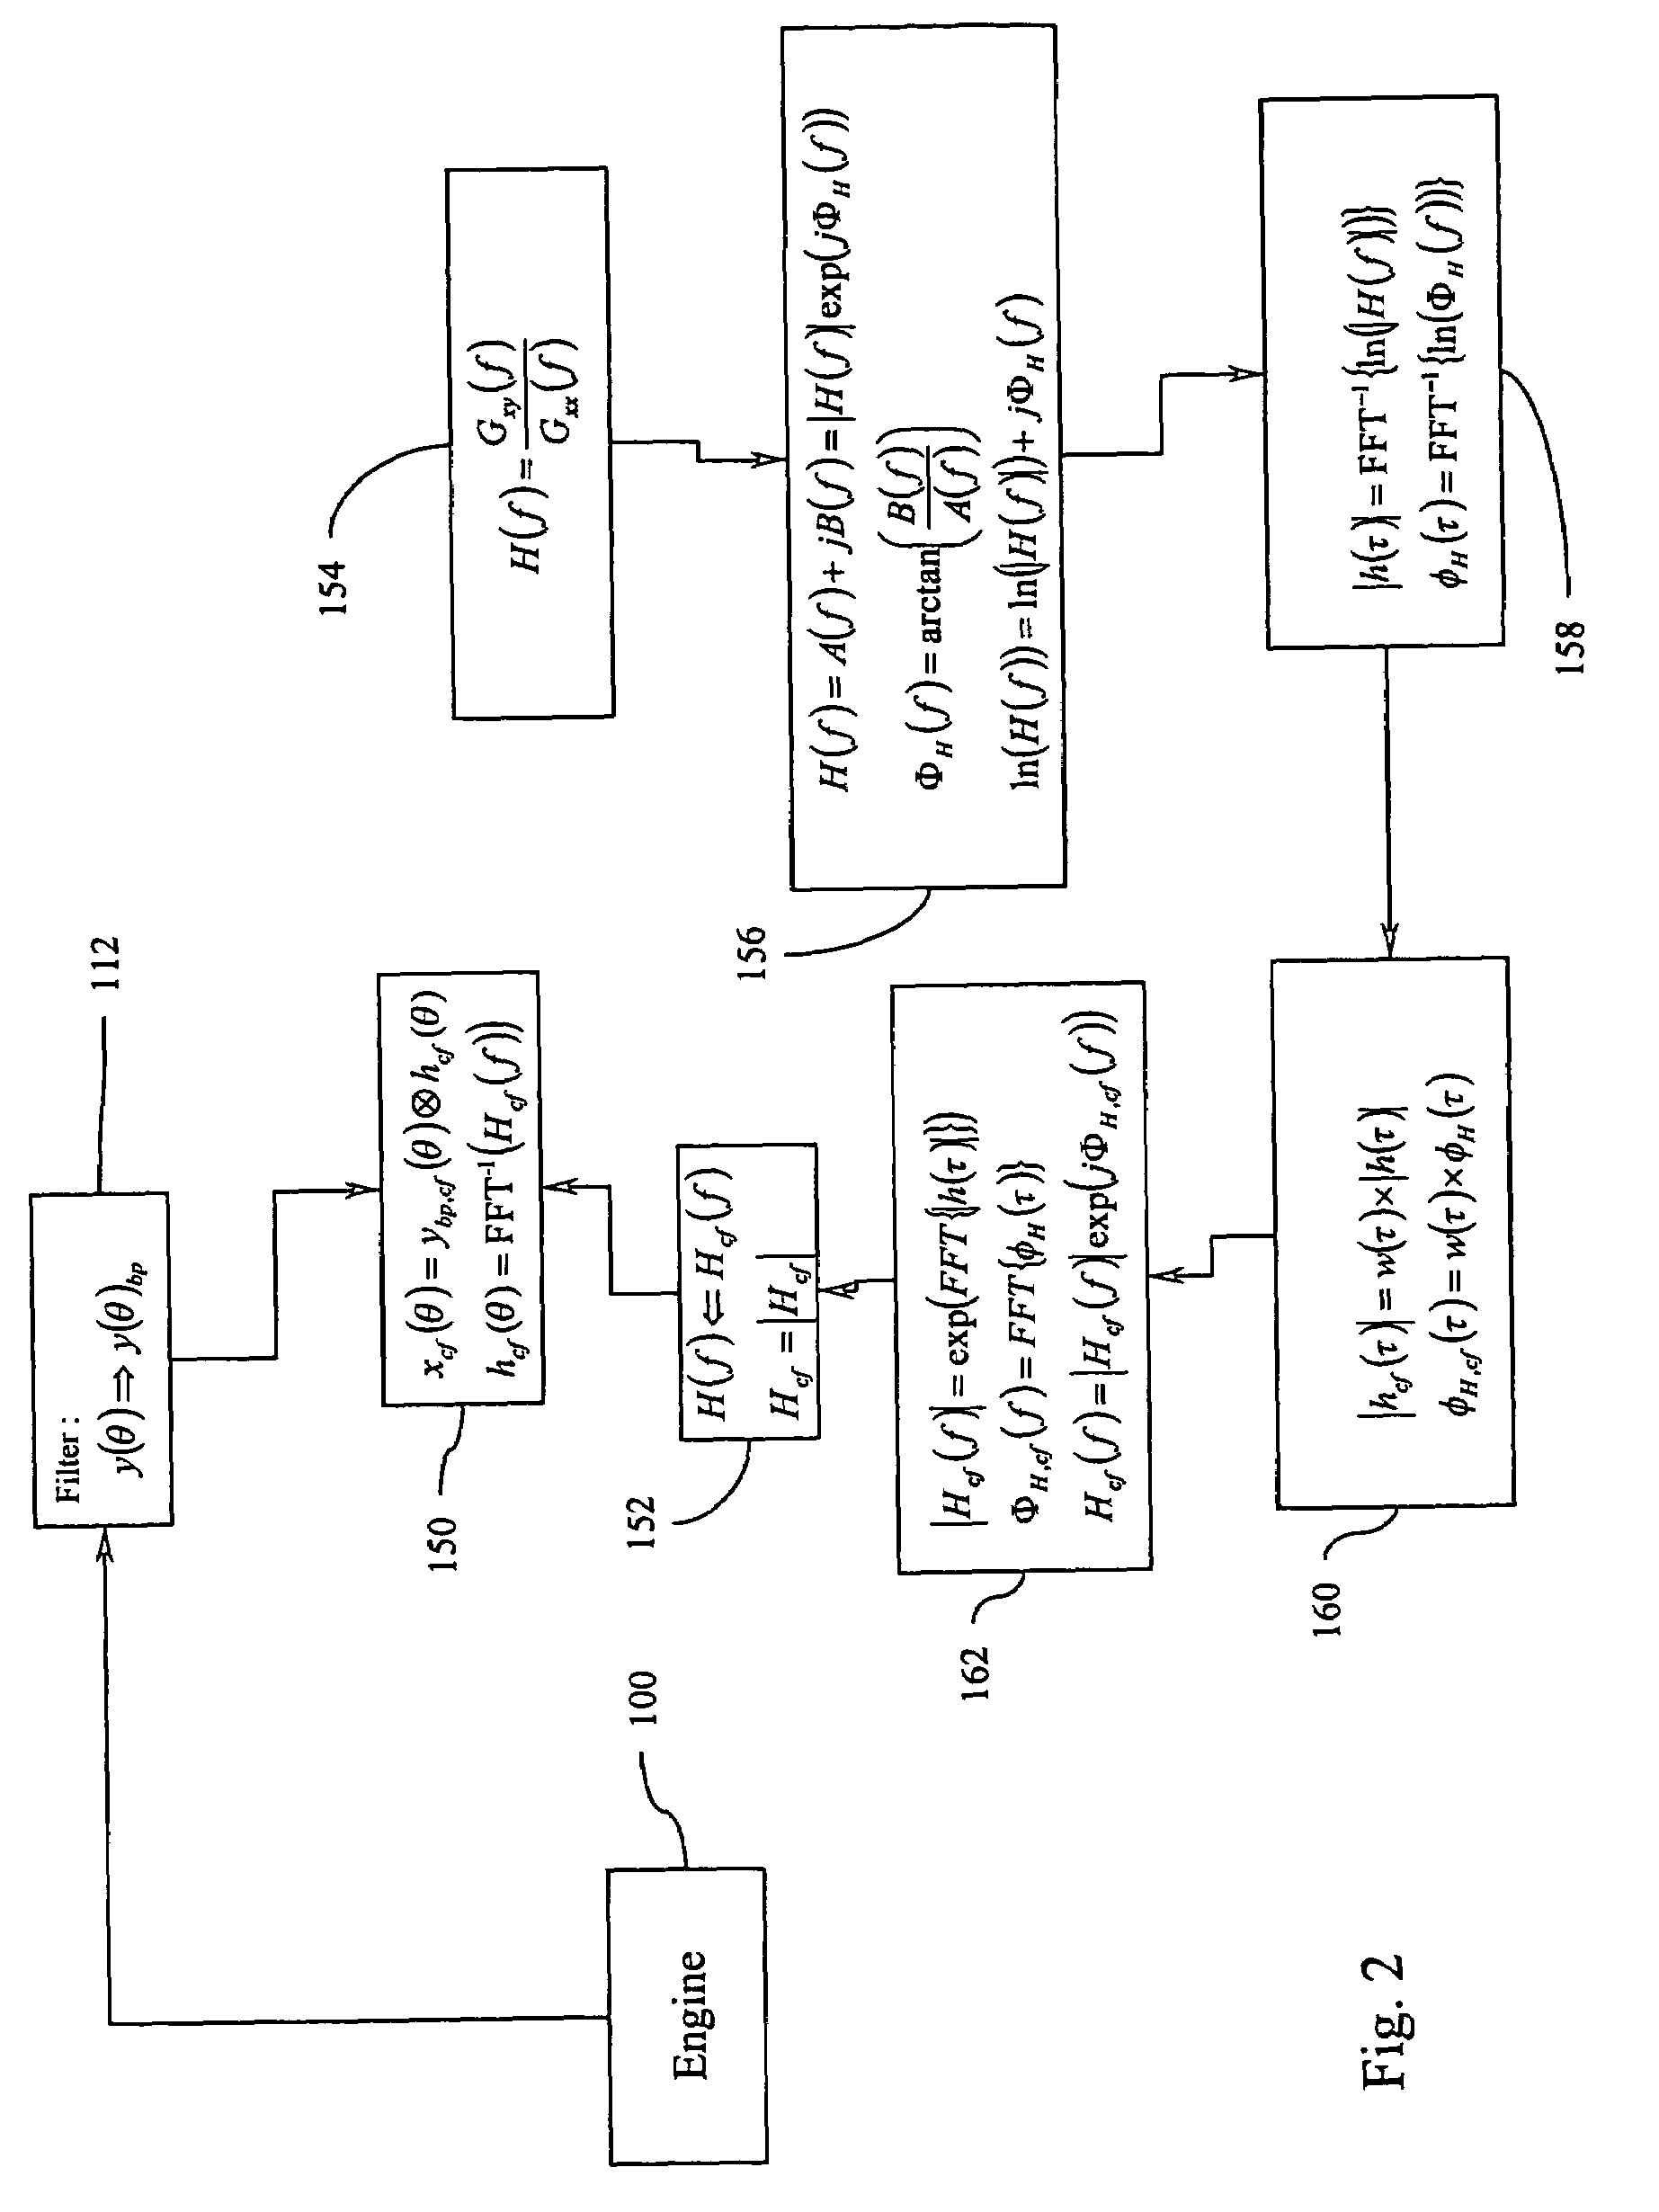 Method and apparatus for controlling an internal combustion engine using accelerometers